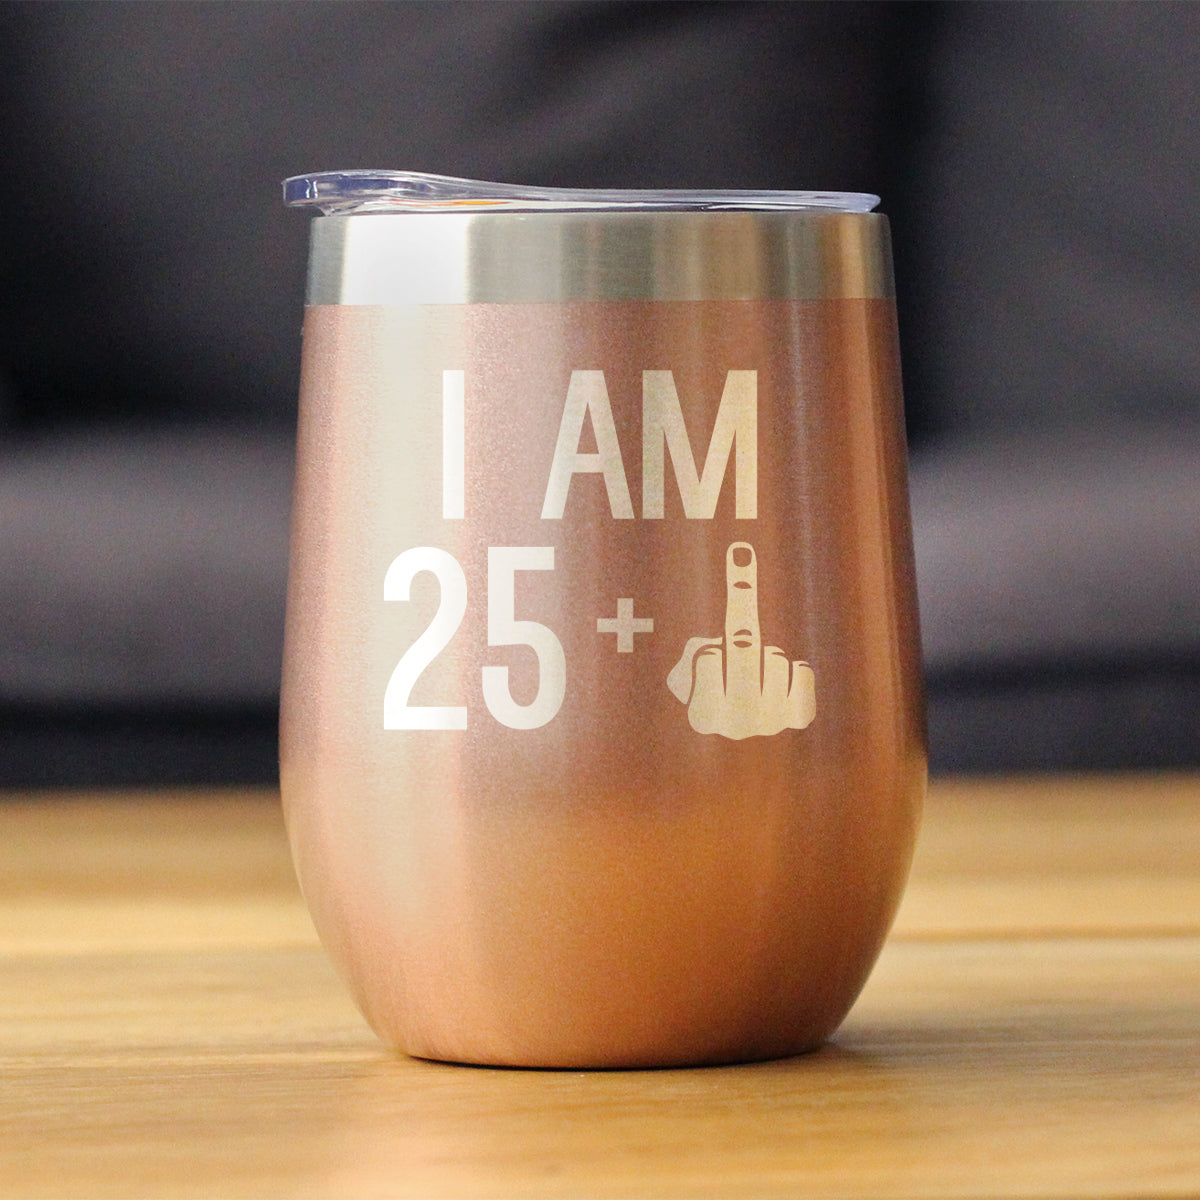 25 + 1 Middle Finger - Wine Tumbler - Cute Funny 26th Birthday Gift for Women or Men Turning 26